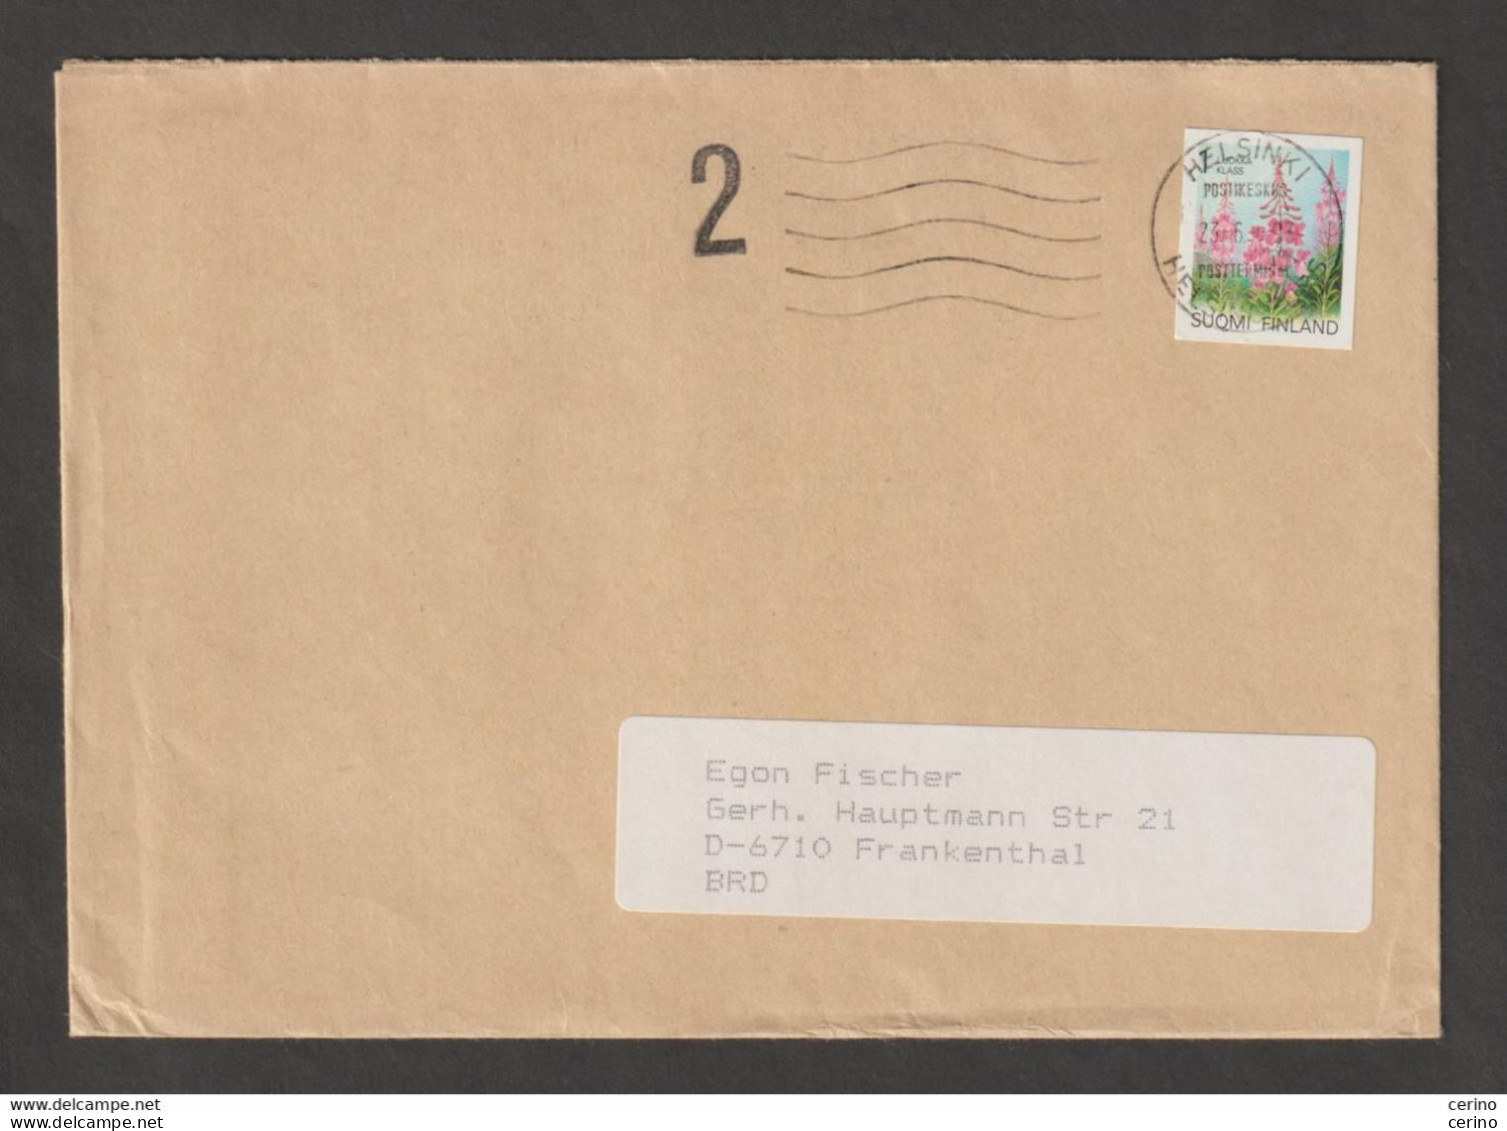 FINLAND:  1993  COVER   WITH  SELF- ADHESIVE  2 M.10 (1155) -  TO  GERMANY - Briefe U. Dokumente